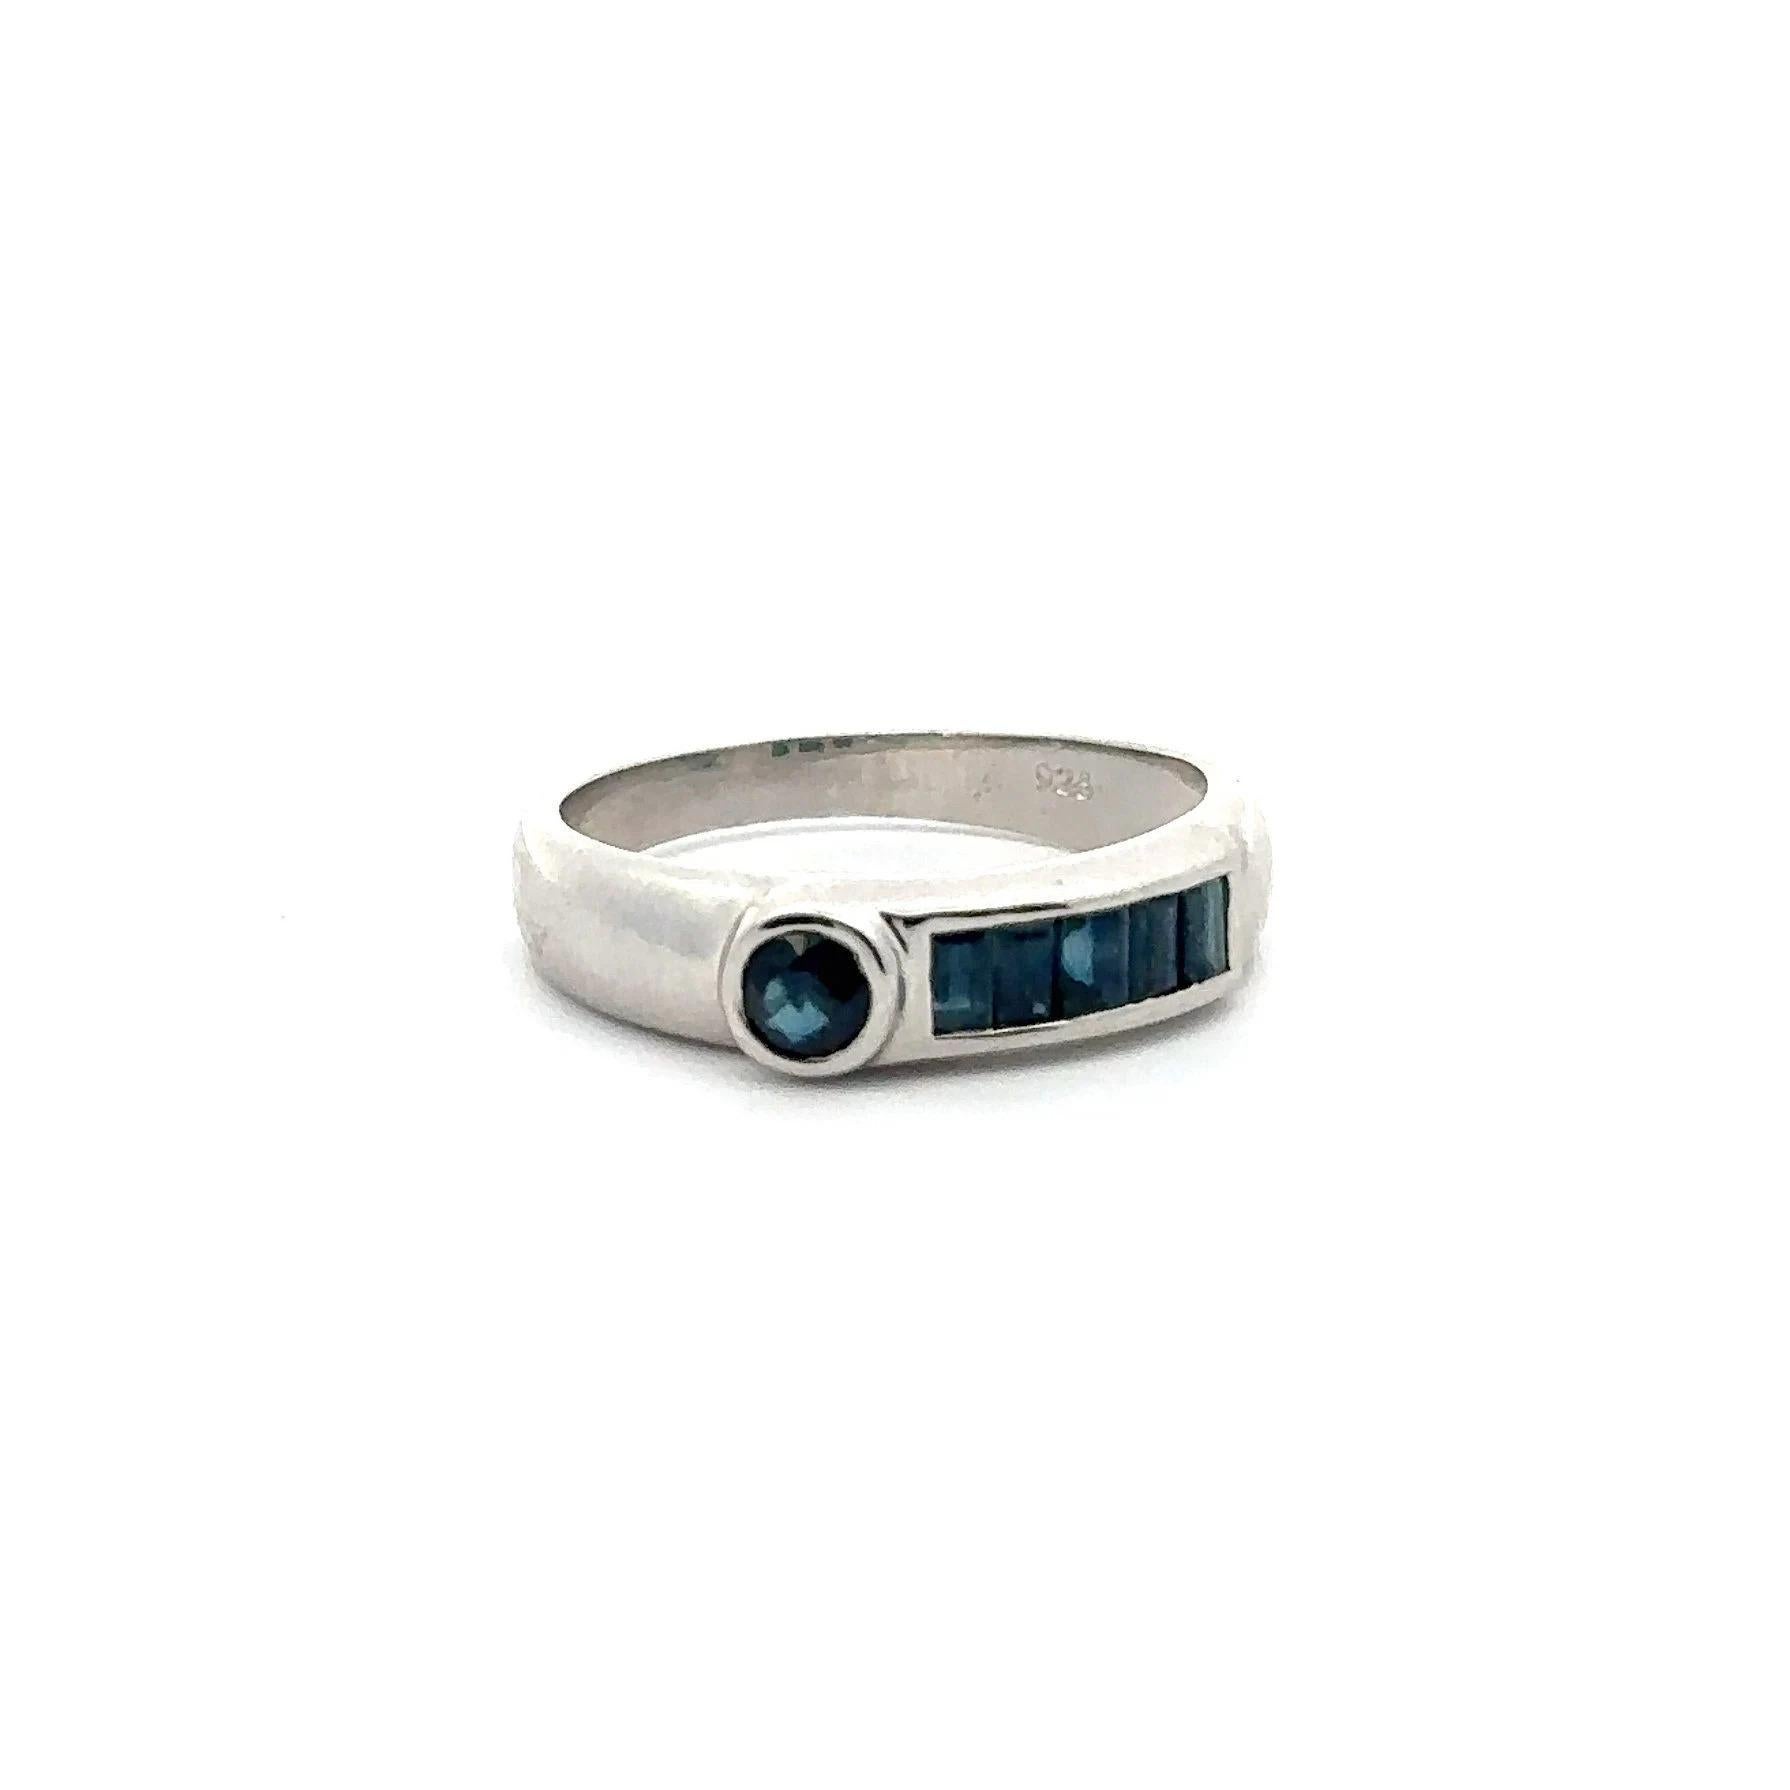 For Sale:  Unique Blue Sapphire Gemstone Band Ring in 925 Sterling Silver, Unisex Ring 5